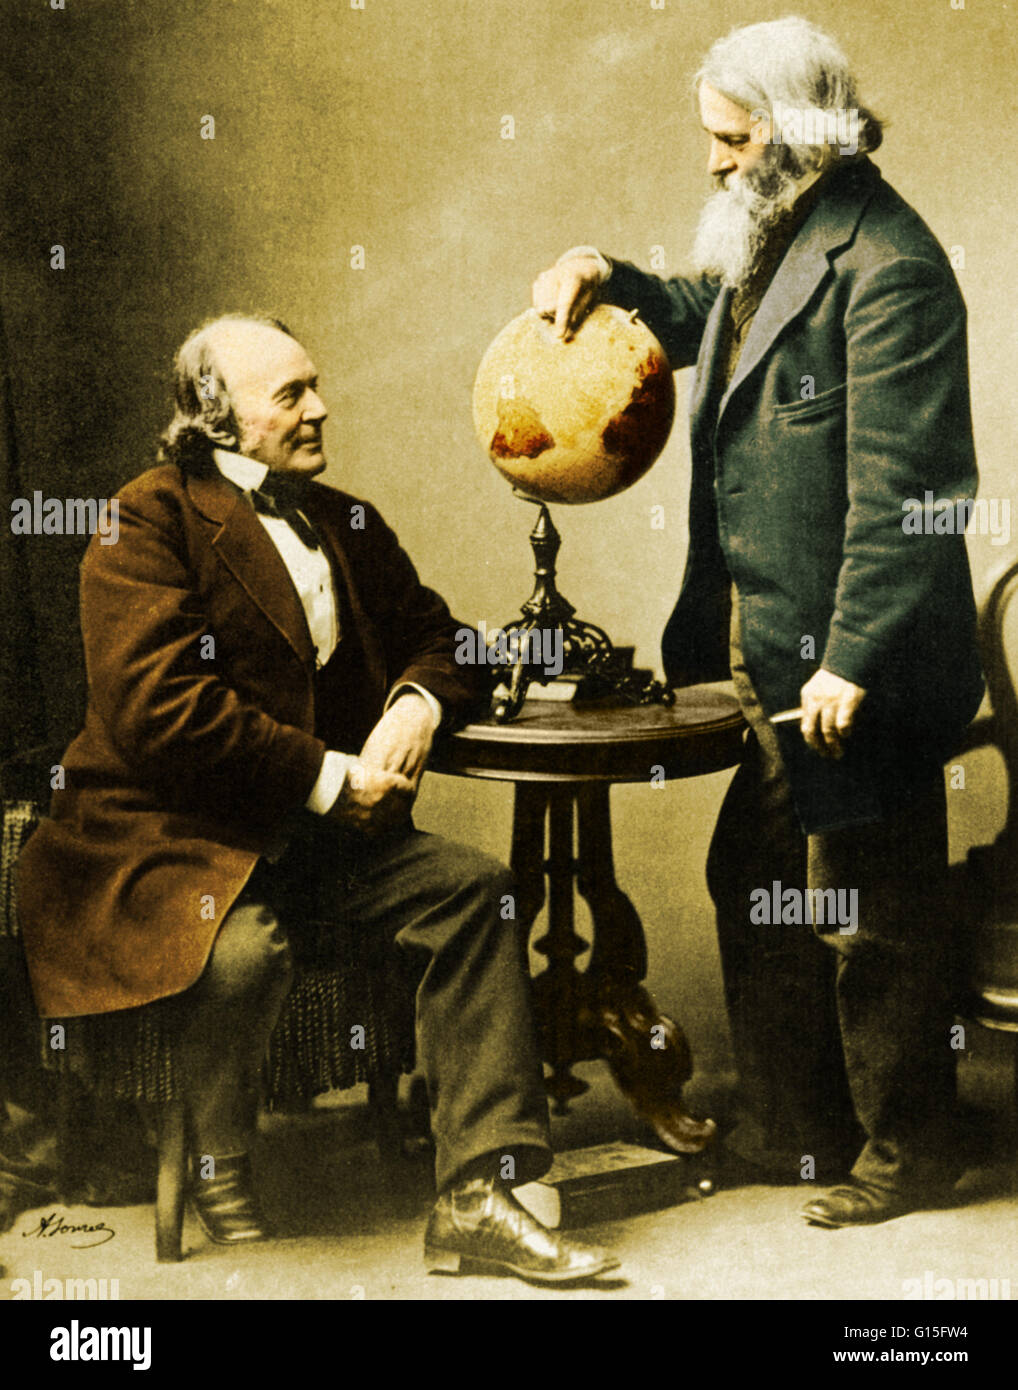 Louis Agassiz, zoologist and geologist, and Benjamin Peirce, mathematician and astronomer, conferring in 1871. Agassiz was an innovator in the study of the natural history of the Earth, while Peirce made contributions to the fields of algebra, the mathema Stock Photo